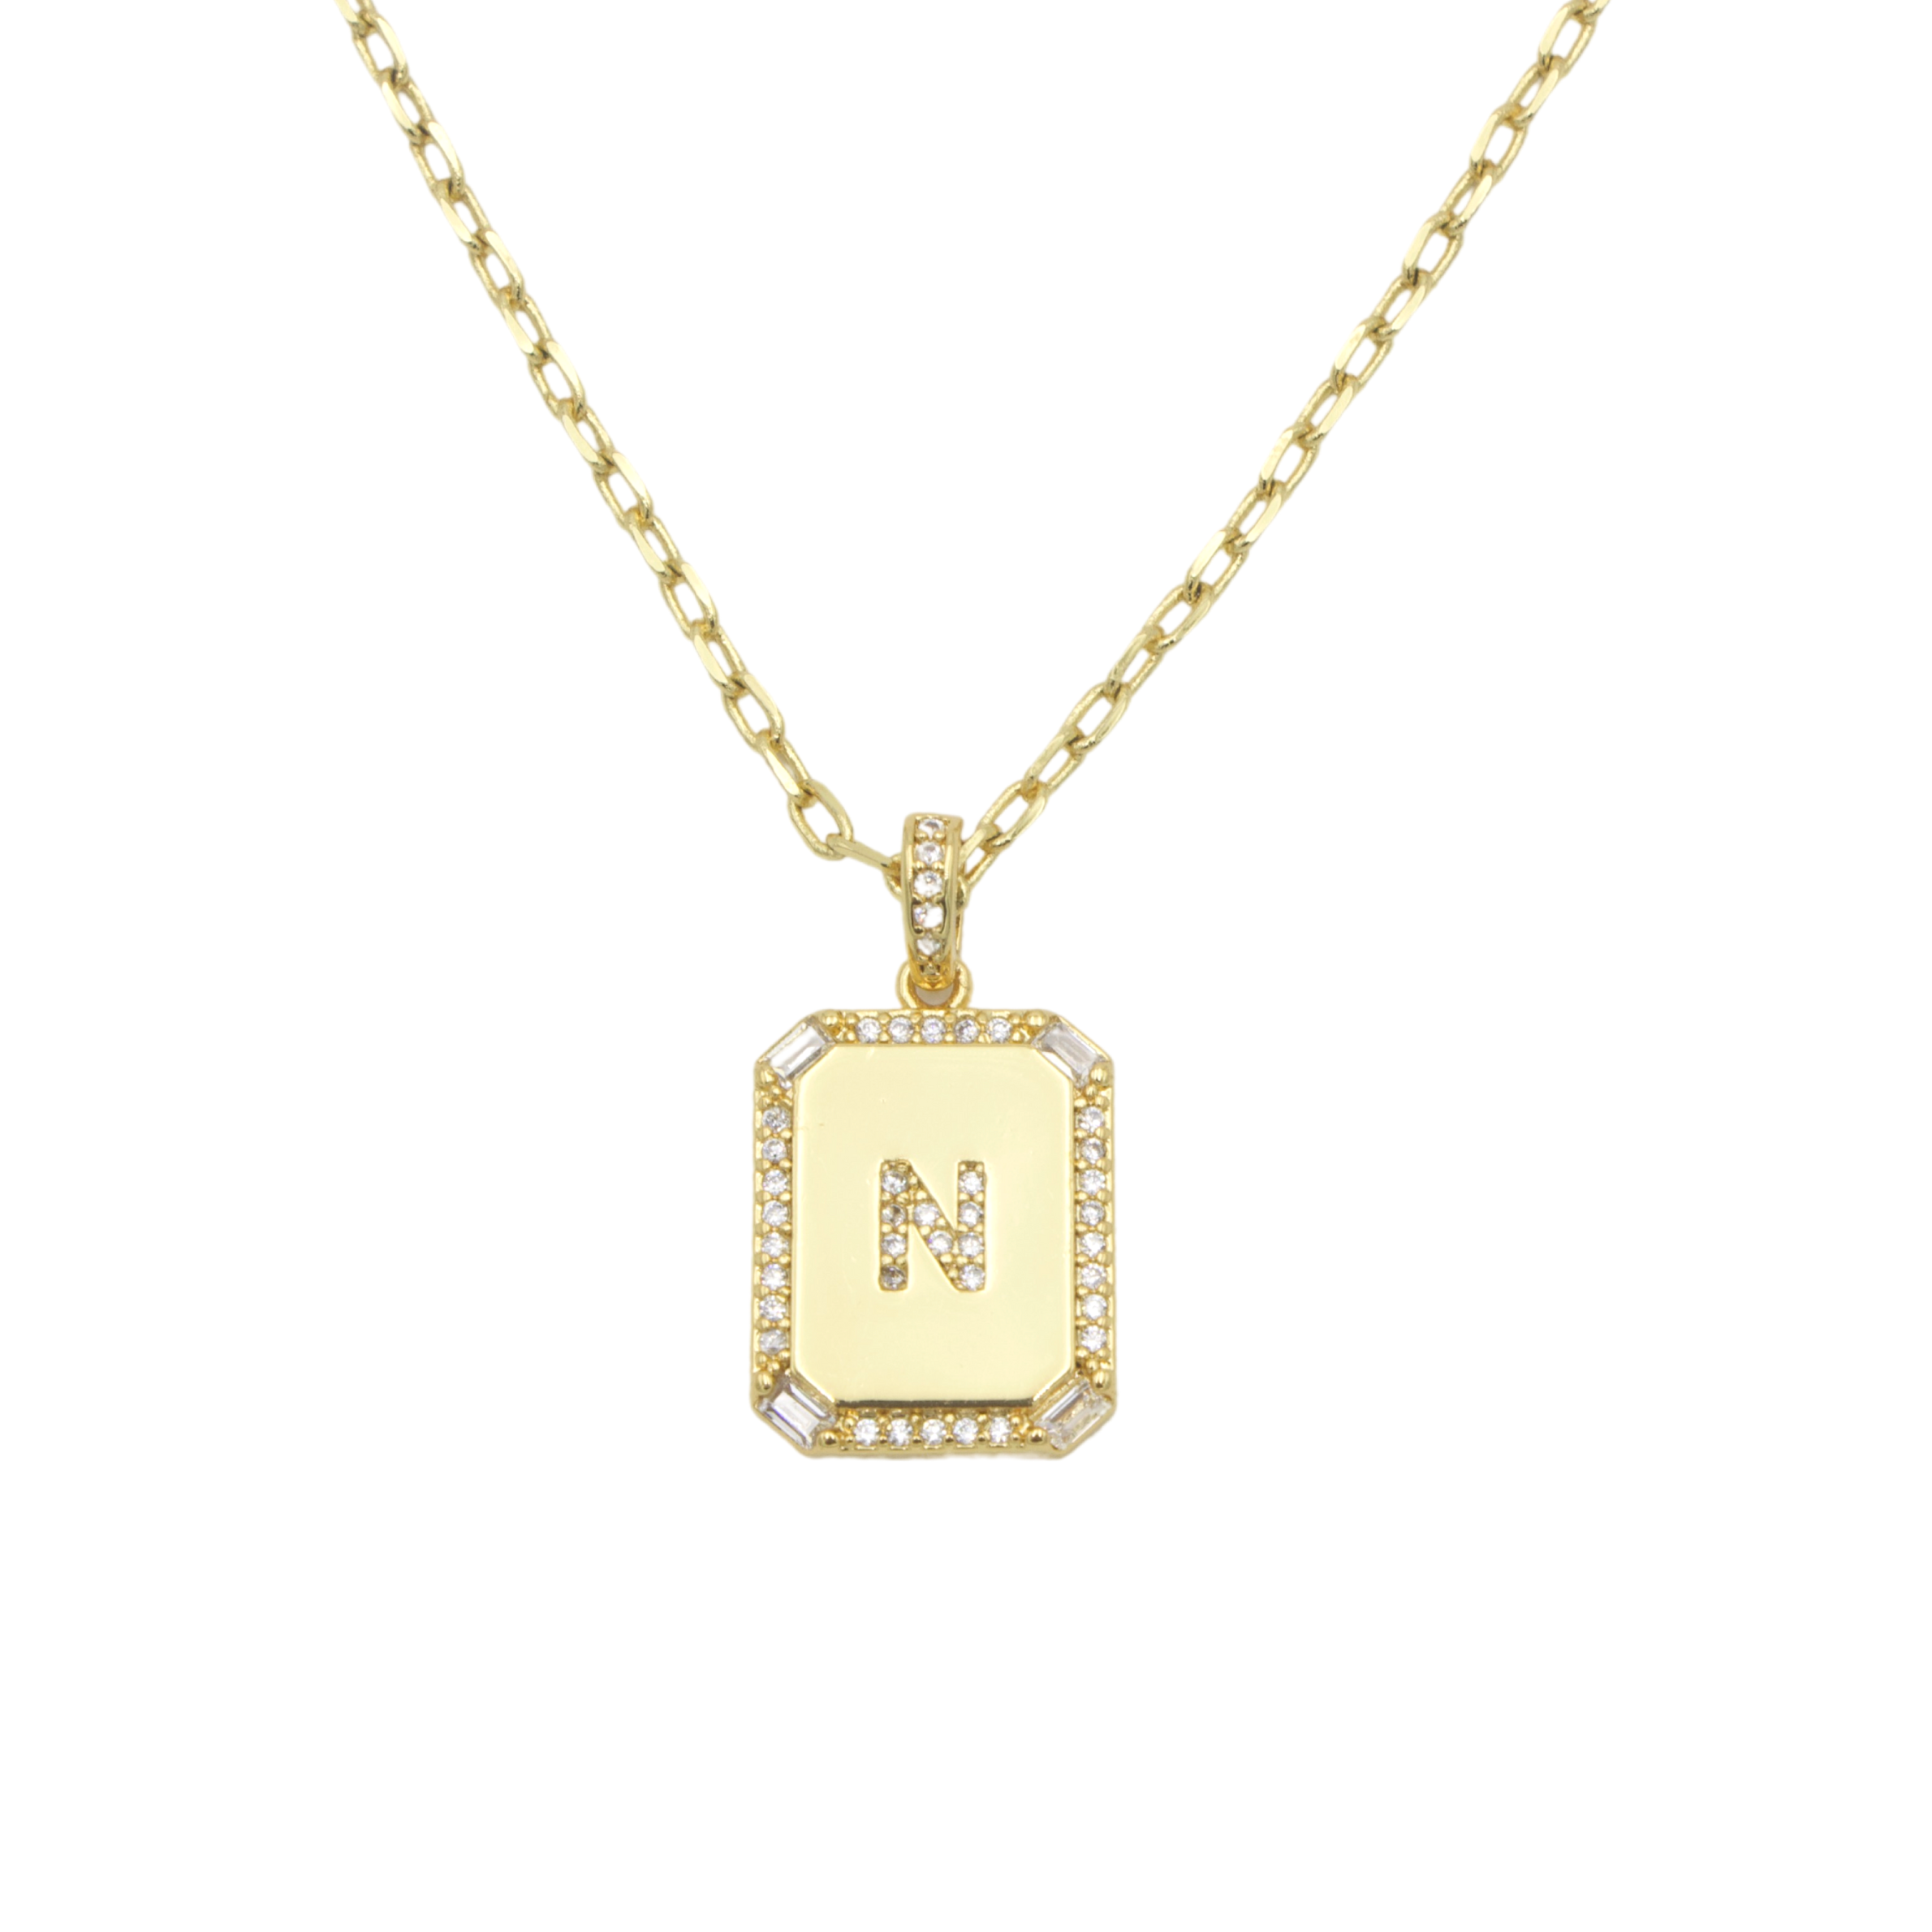 AW Boutique's gold filled 16 inch cable chain necklace finished with a dainty initial pendant with cubic zirconia detail. N initial shown.